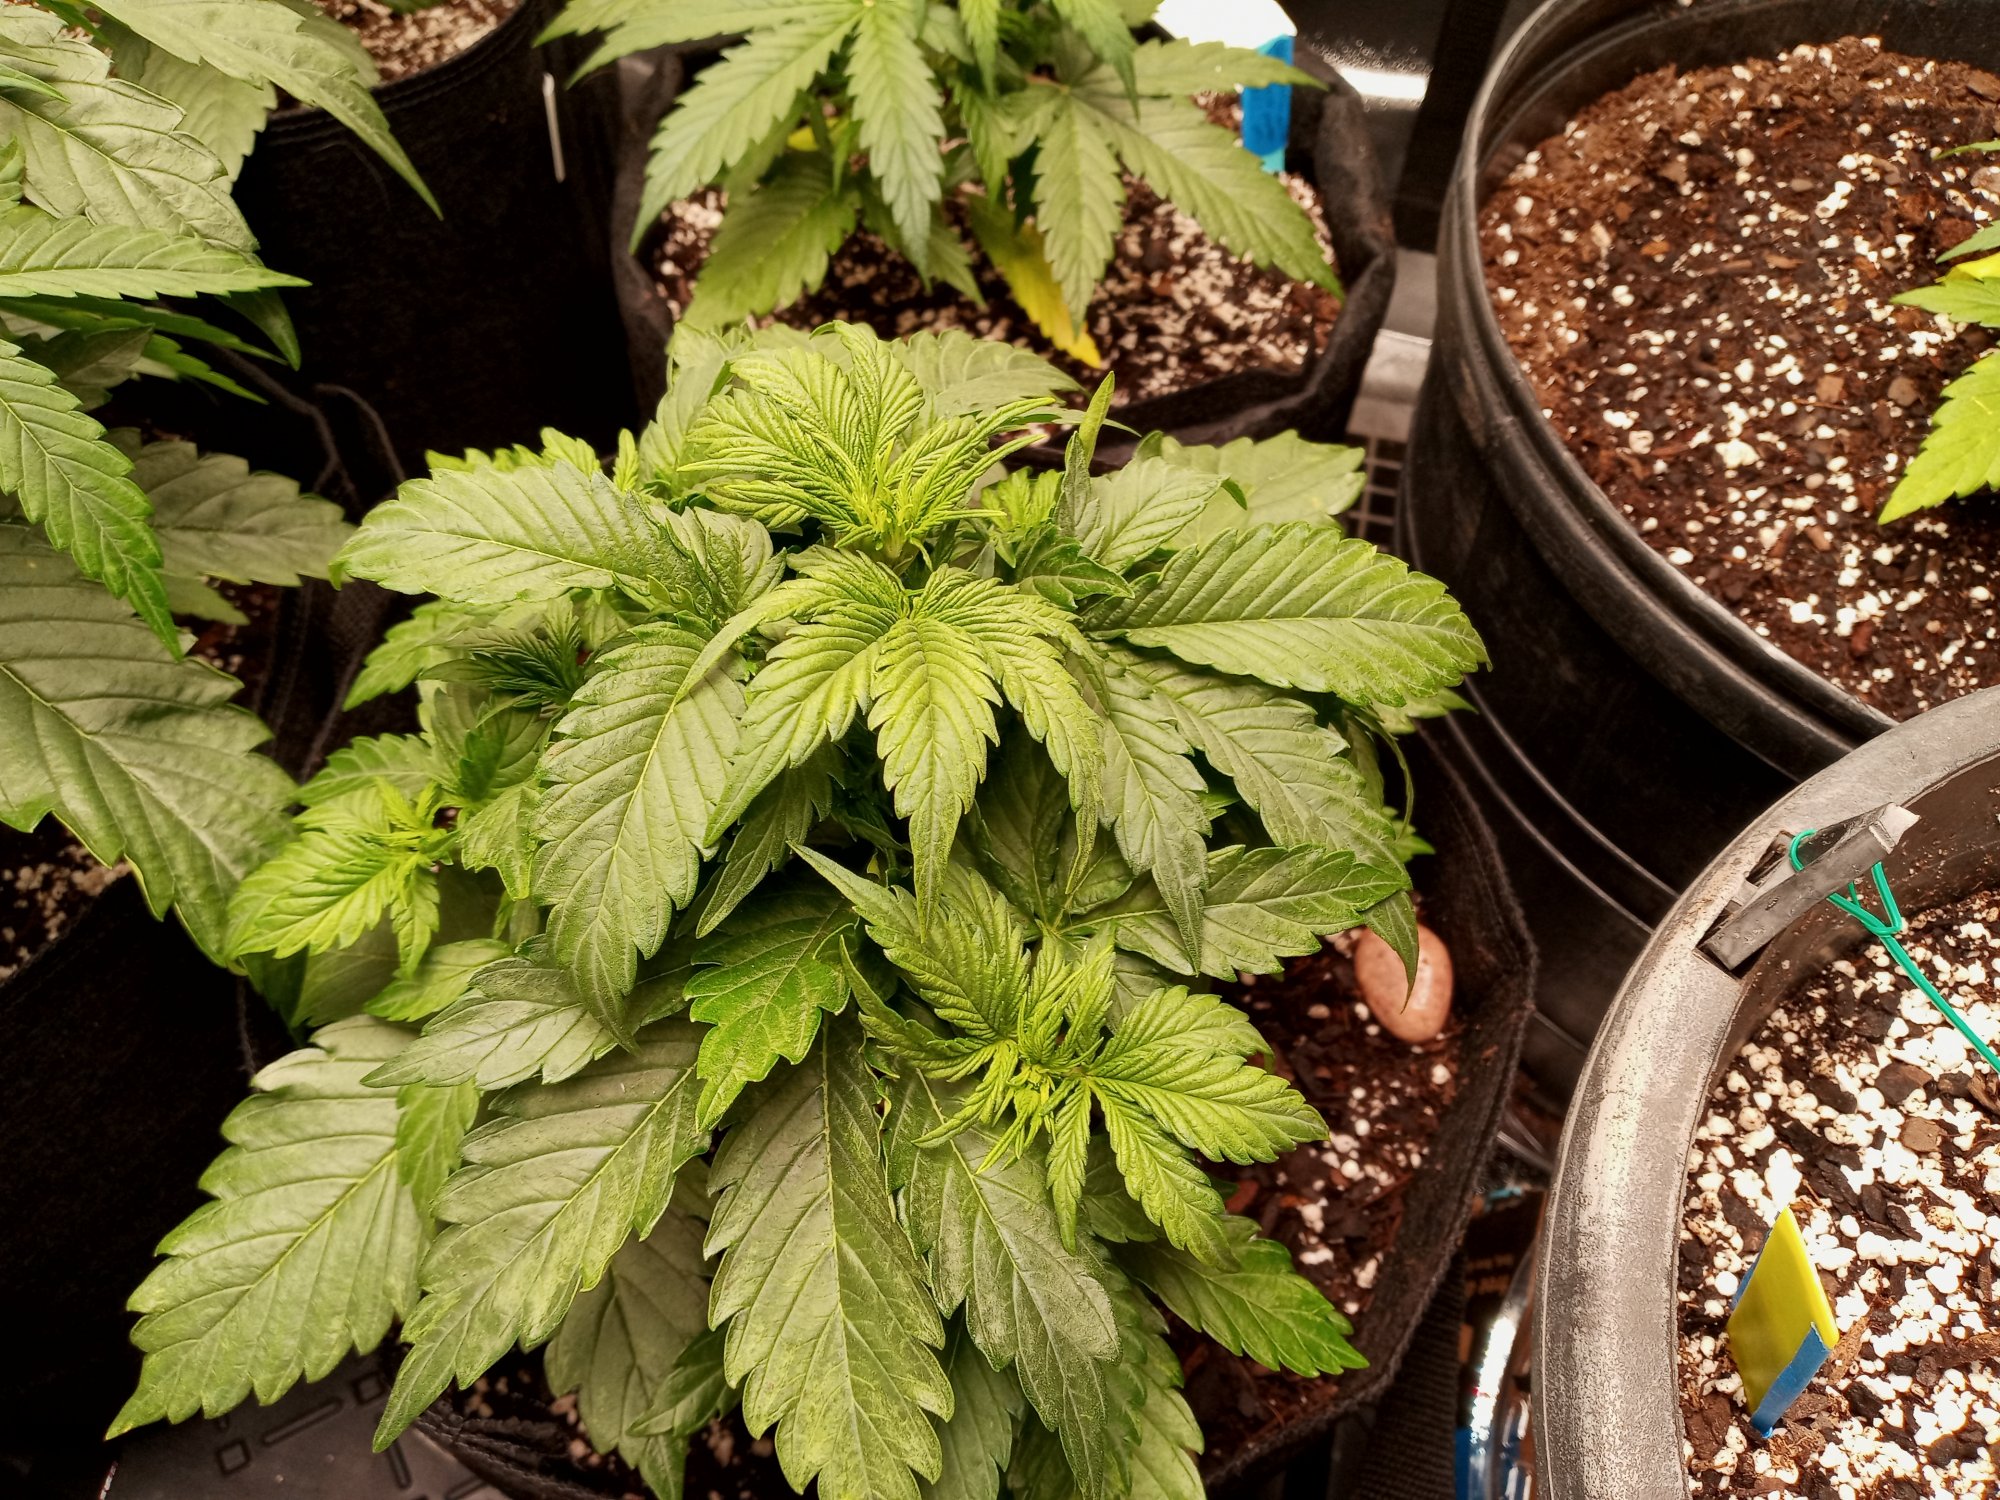 New to autos indoor and dwc trying a lil of each lolhows my grow 3